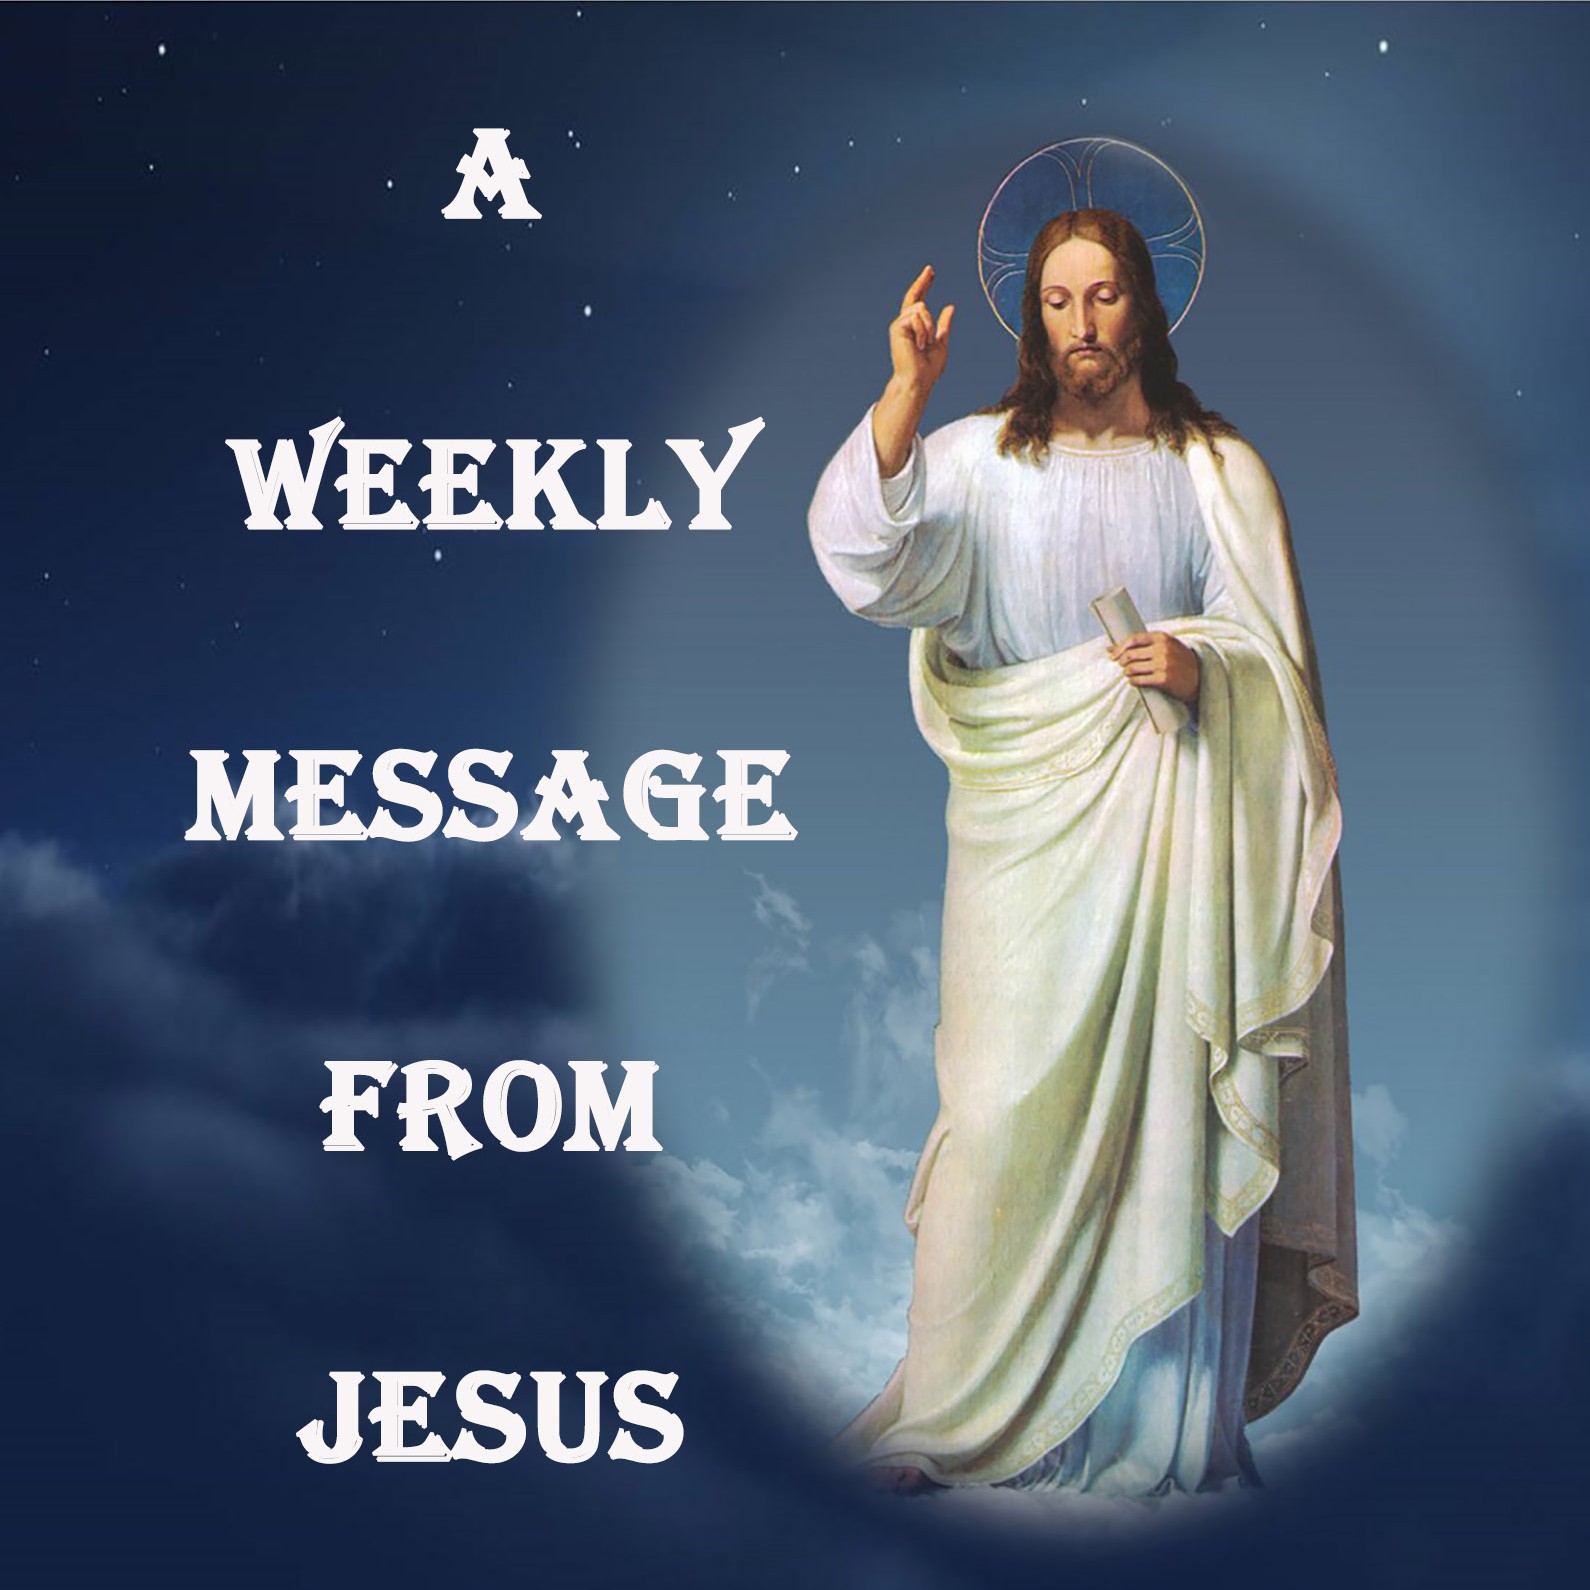 A Weekly Message From Jesus